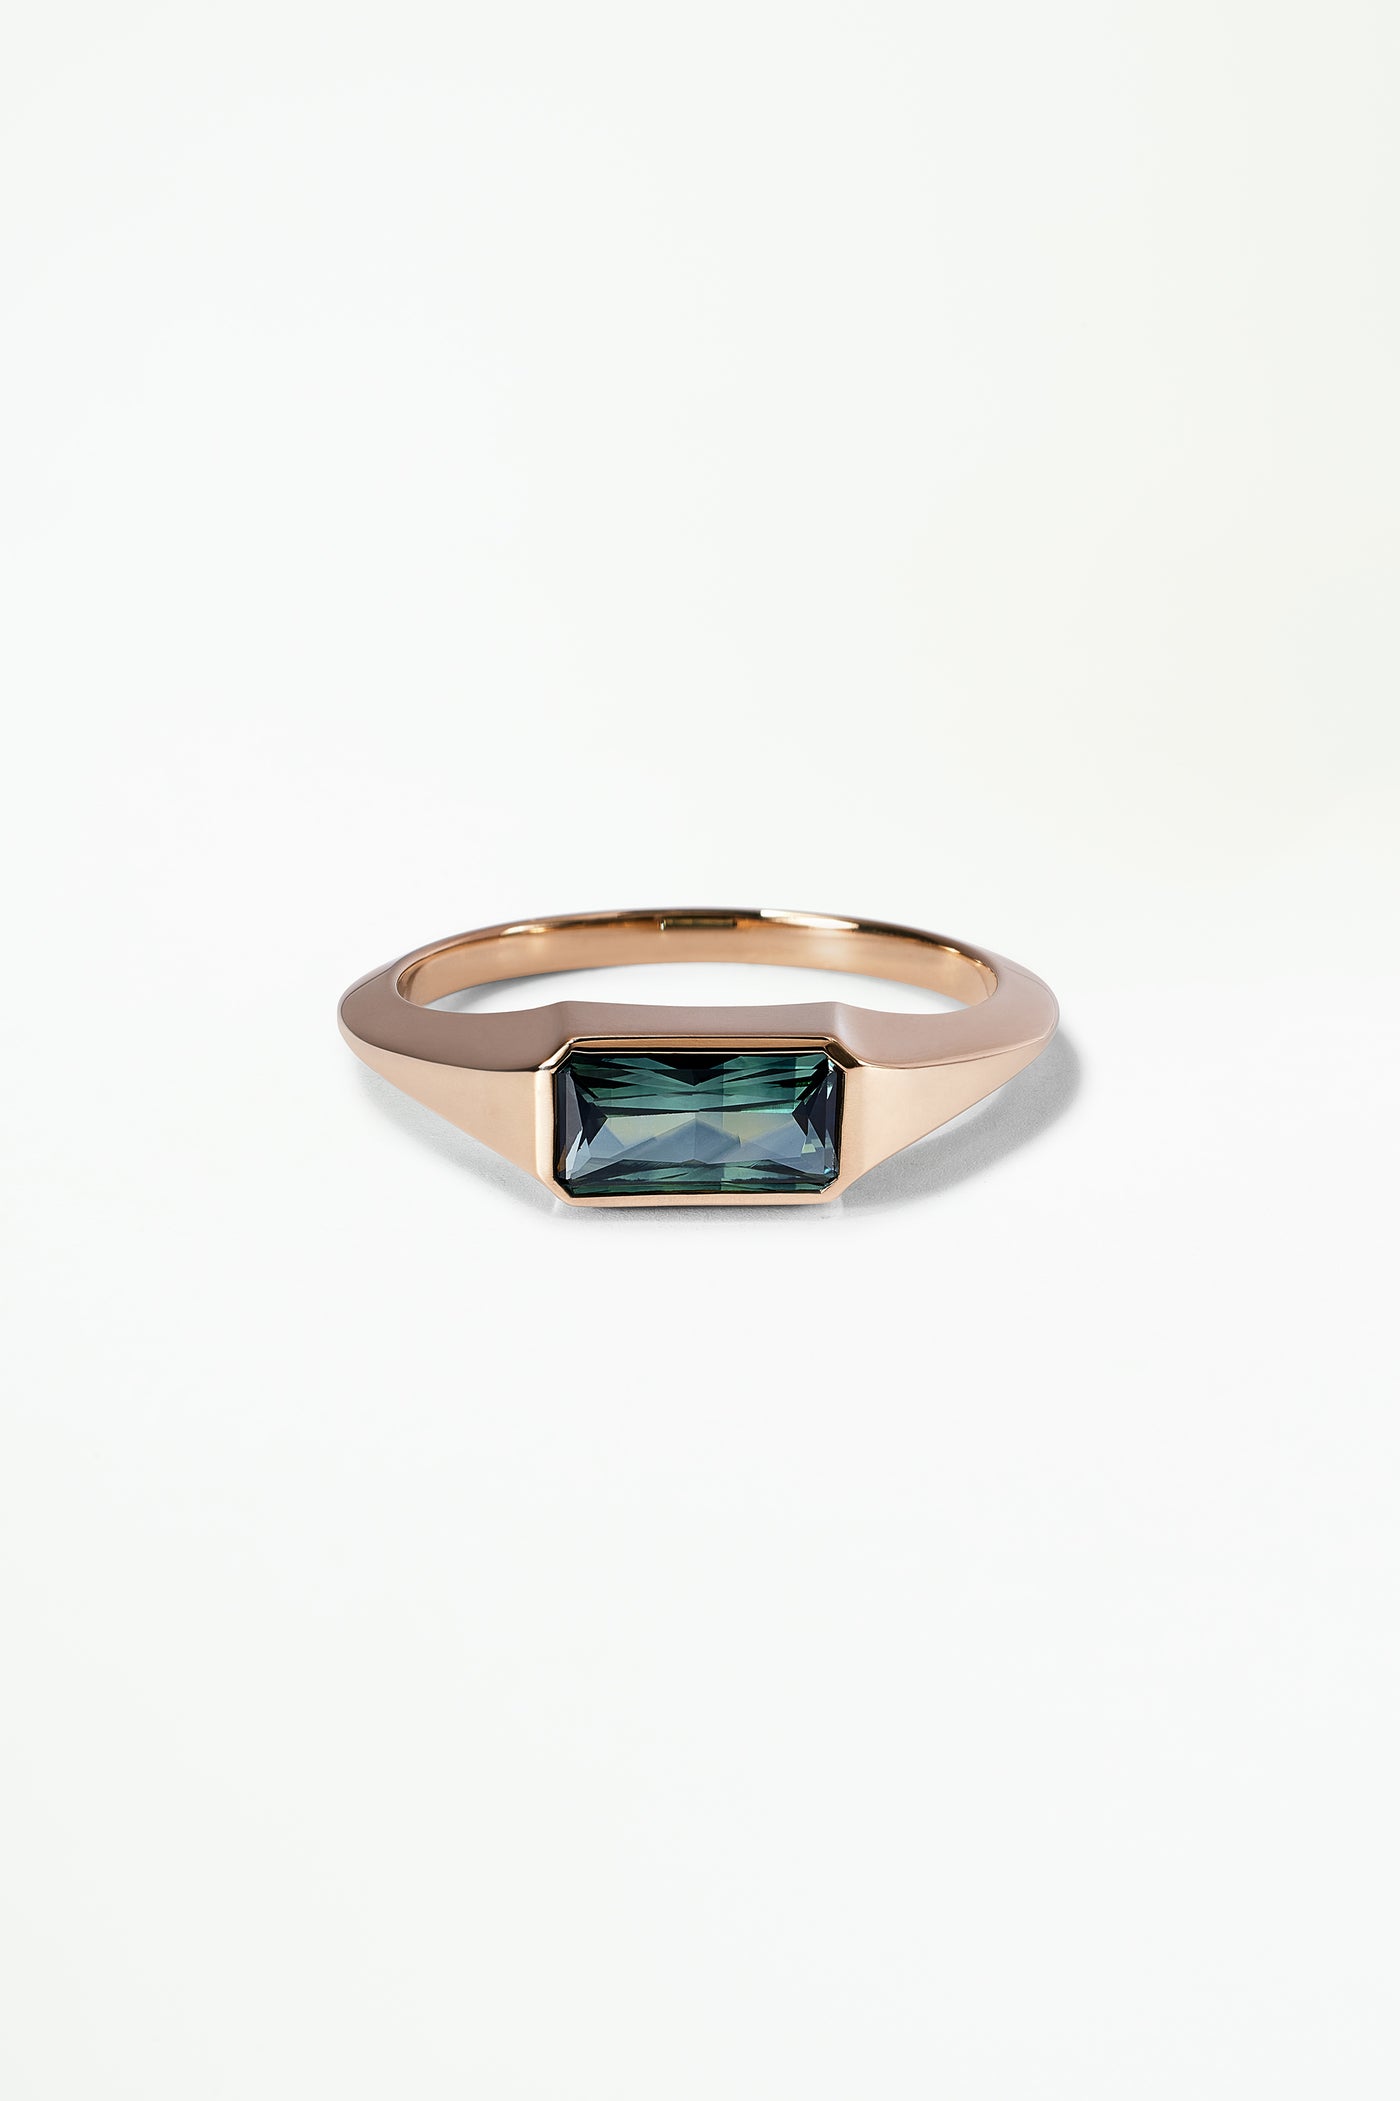 One of a Kind Radiant Cut Sapphire Signet Ring No. 29